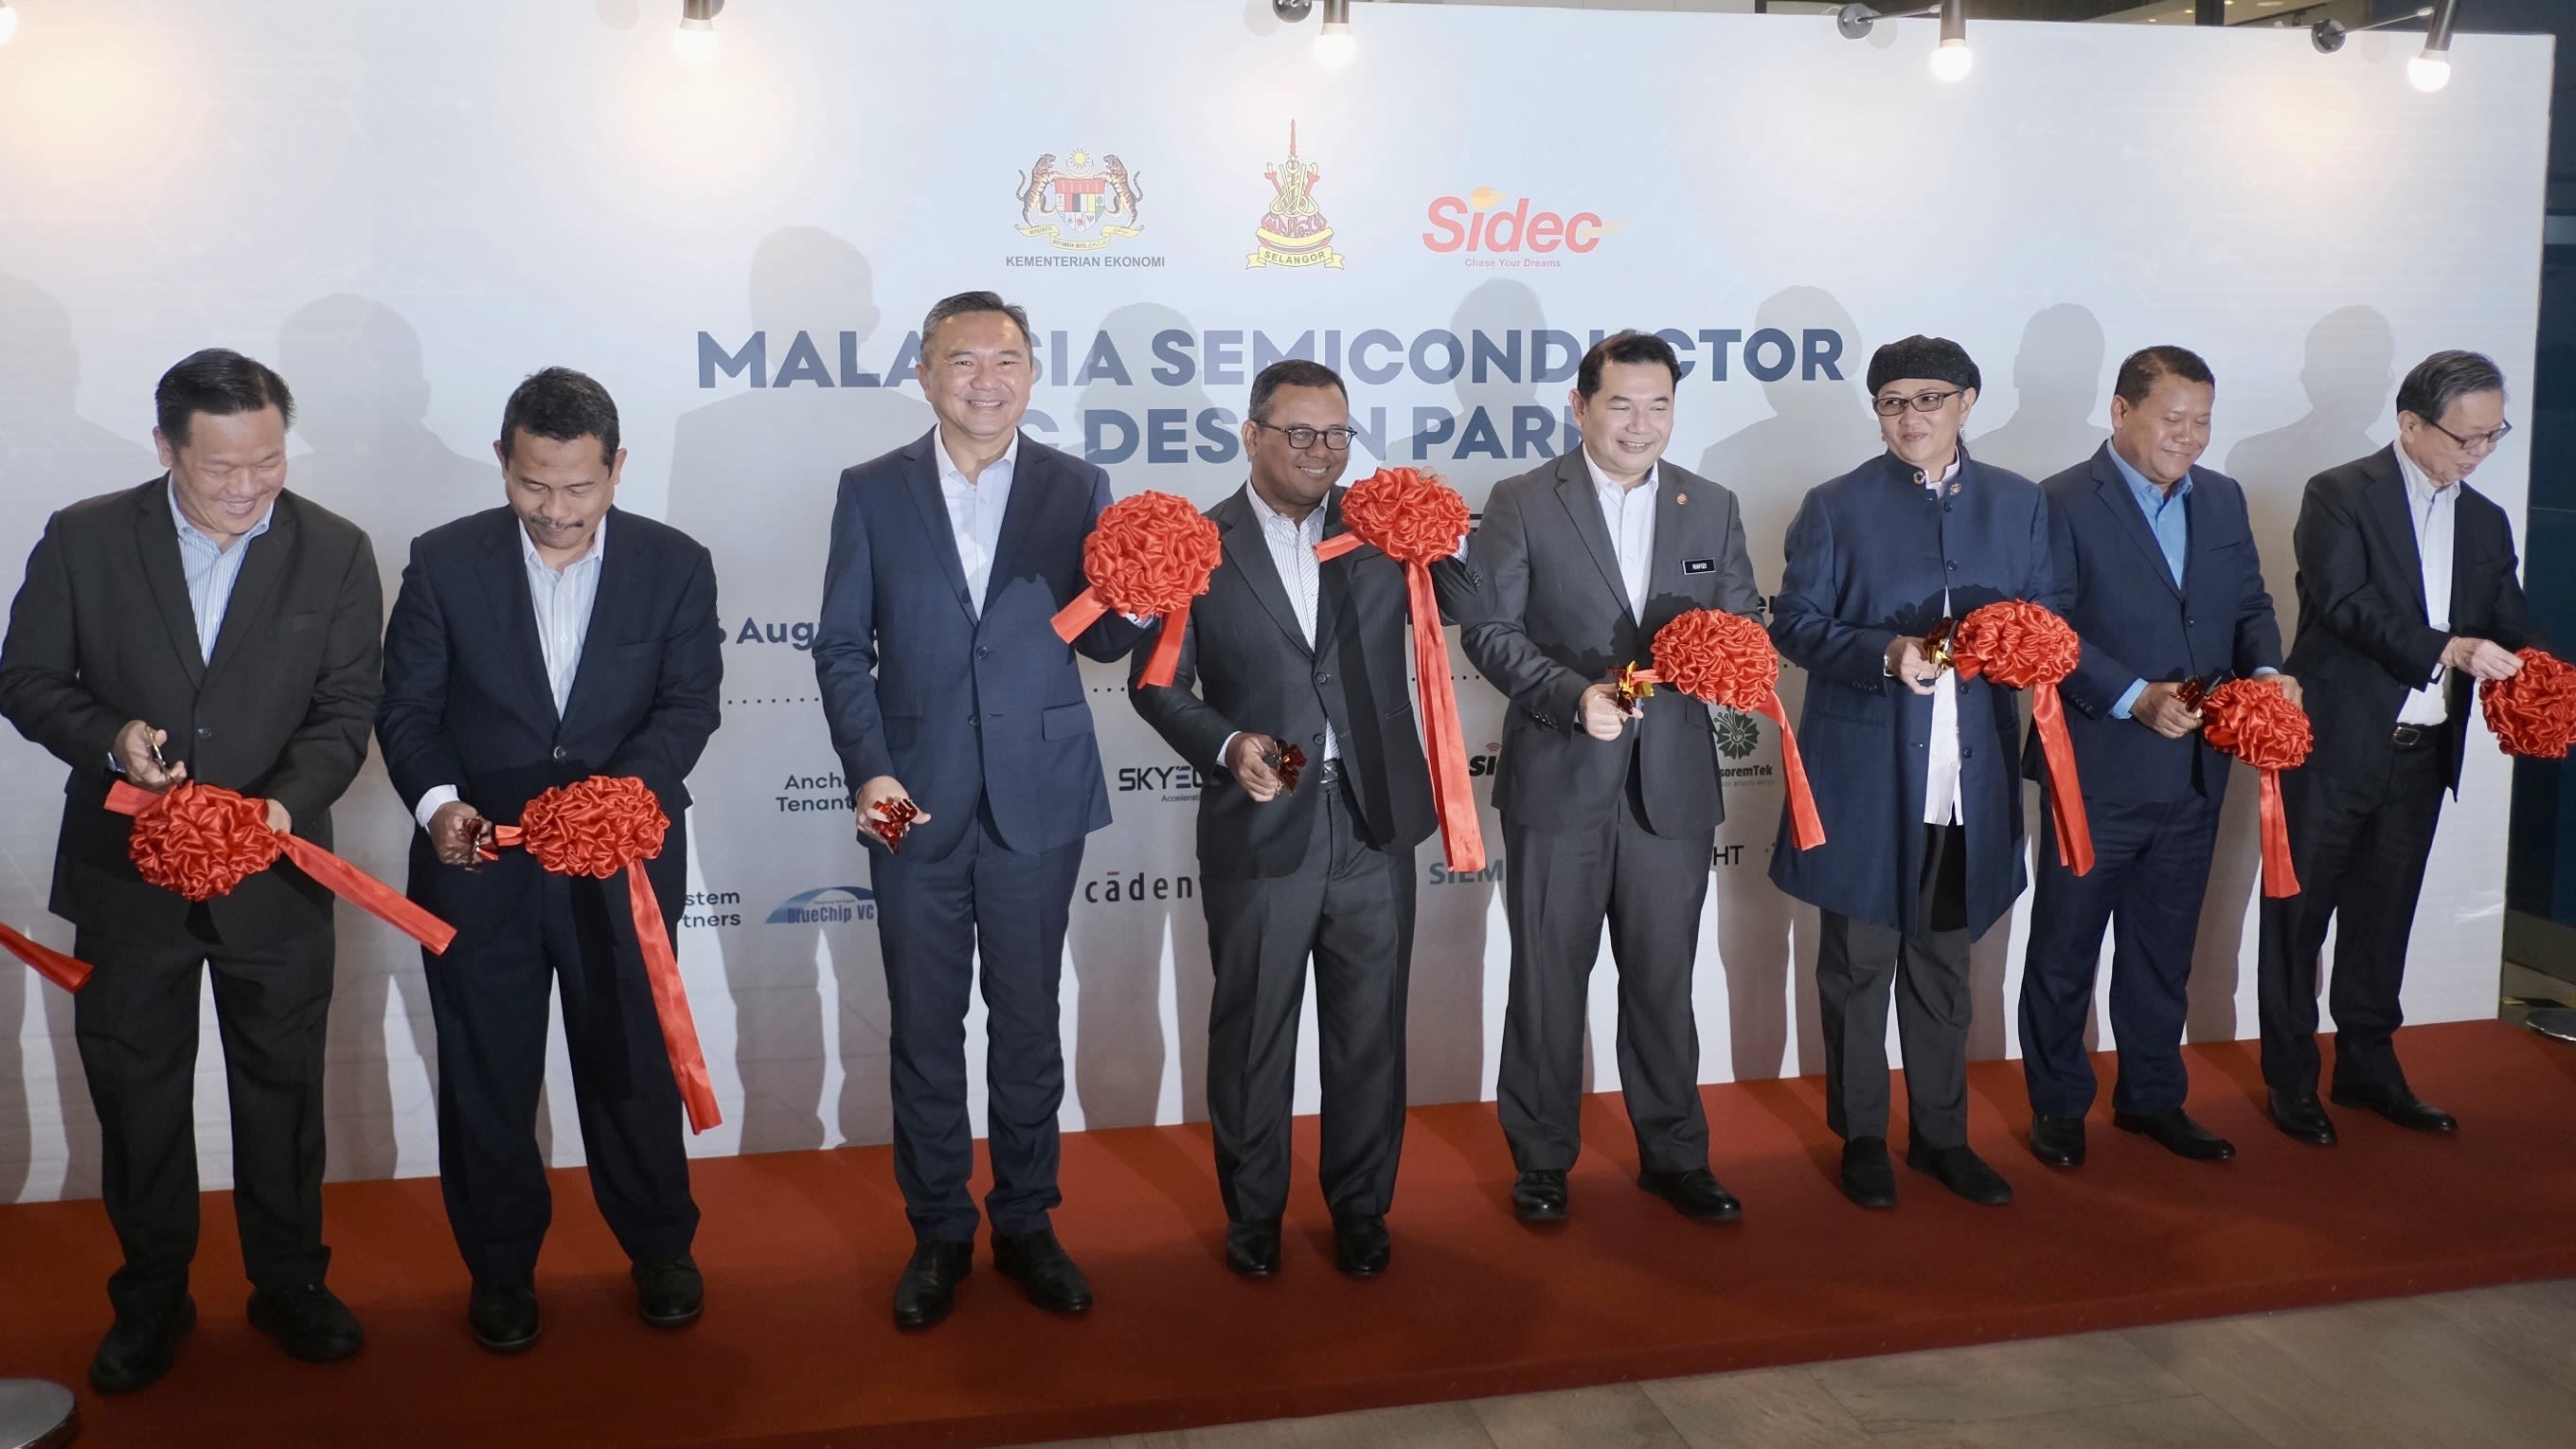 Malaysia moves up value chain with first semiconductor park